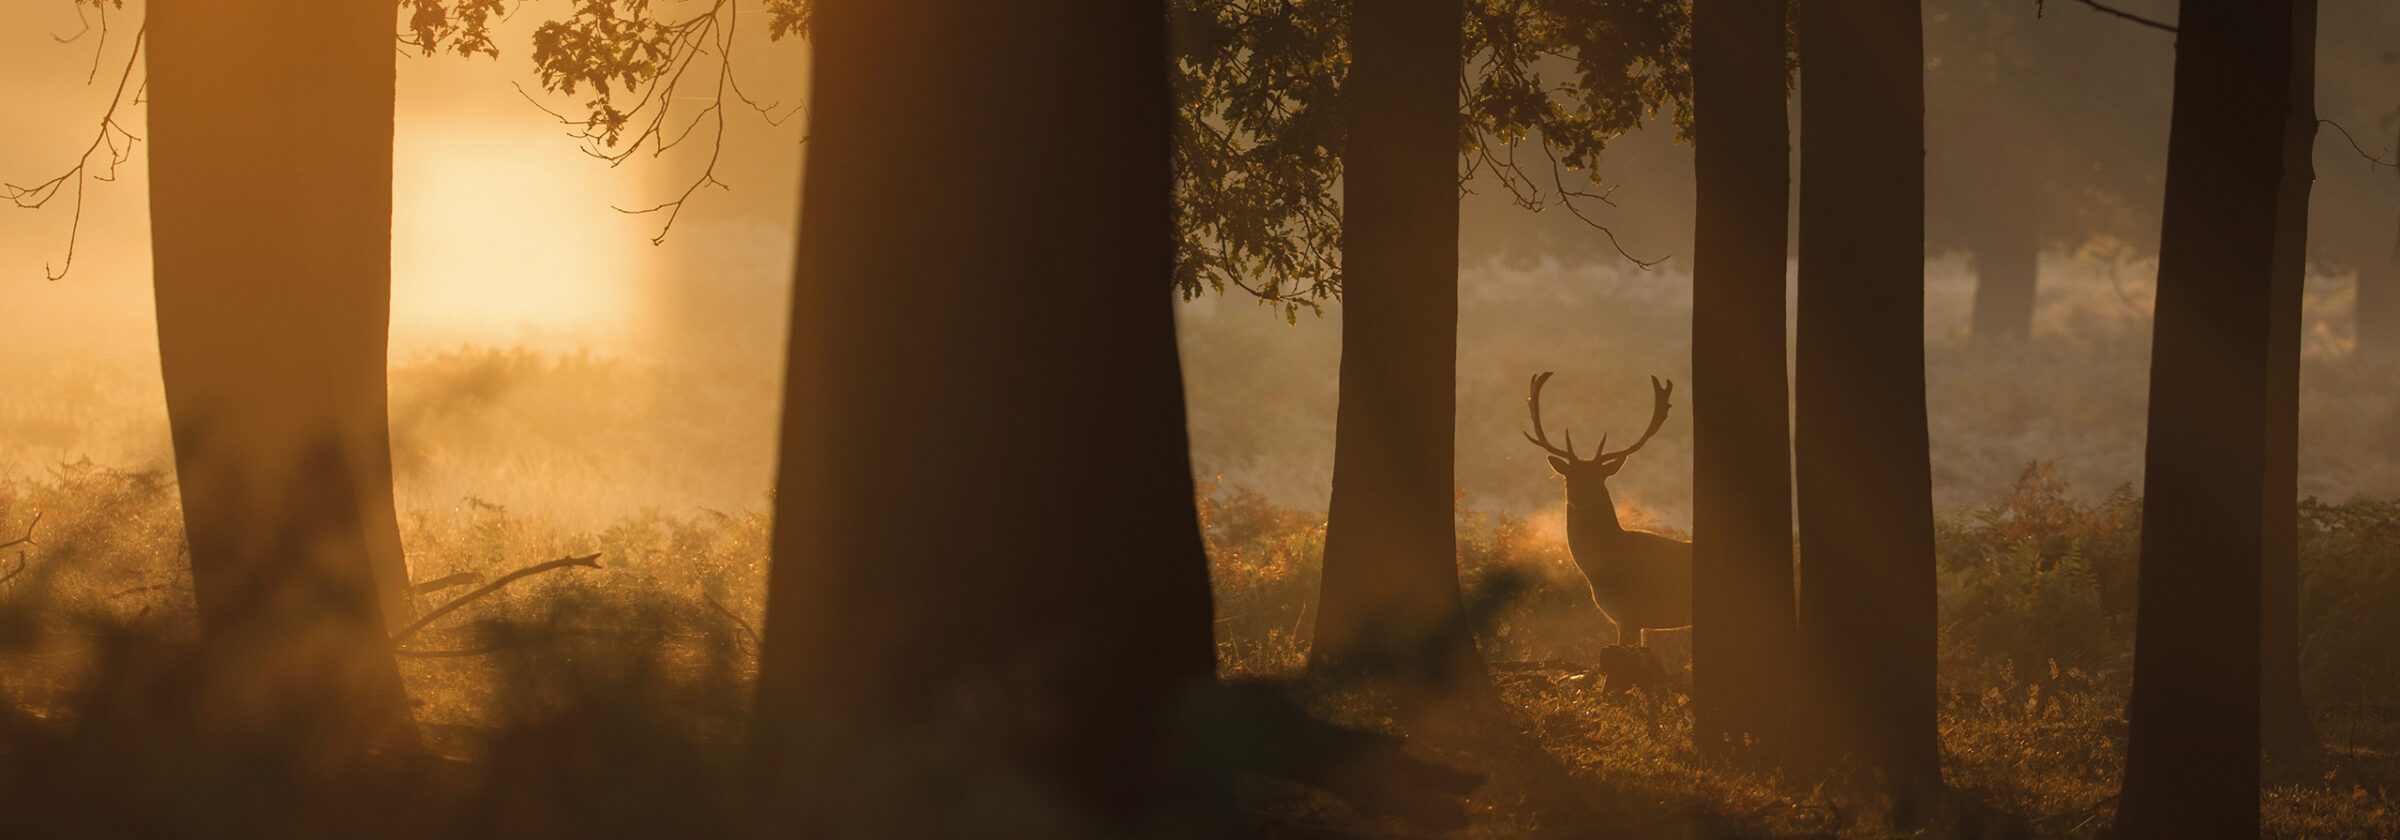 Bona Raw concept image by Adentity os a deer in the forest